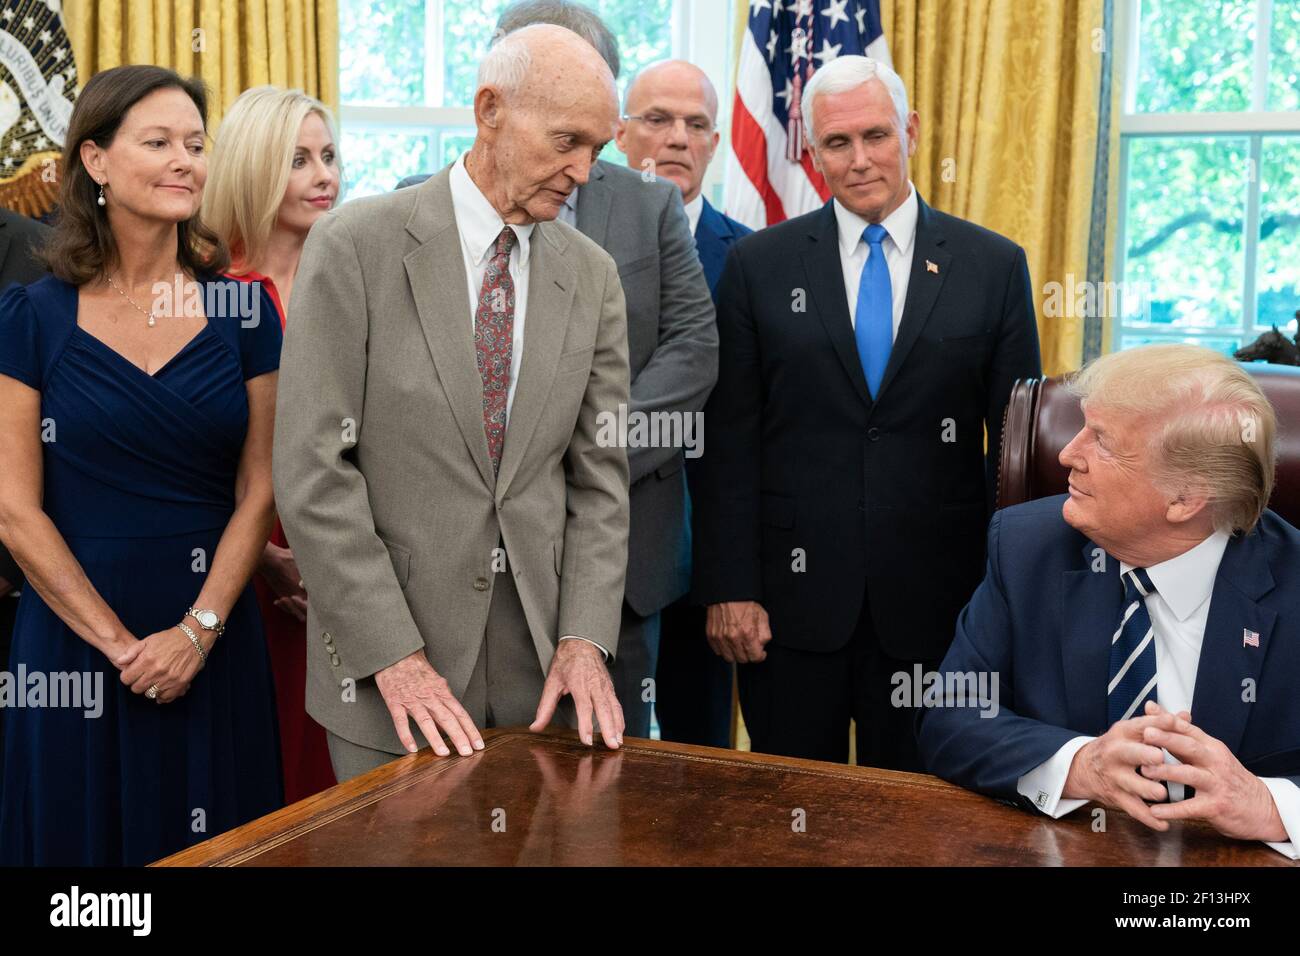 President Donald Trump Vice President Mike Pence and NASA Administrator Jim Bridenstine welcome Apollo 11 astronauts Buzz Aldrin and Michael Collins along with the family members of astronaut Neil Armstrong Friday July 19 2019 to the Oval Office of the White House to commemorate the 50th anniversary of the Apollo 11 Moon Landing. Stock Photo